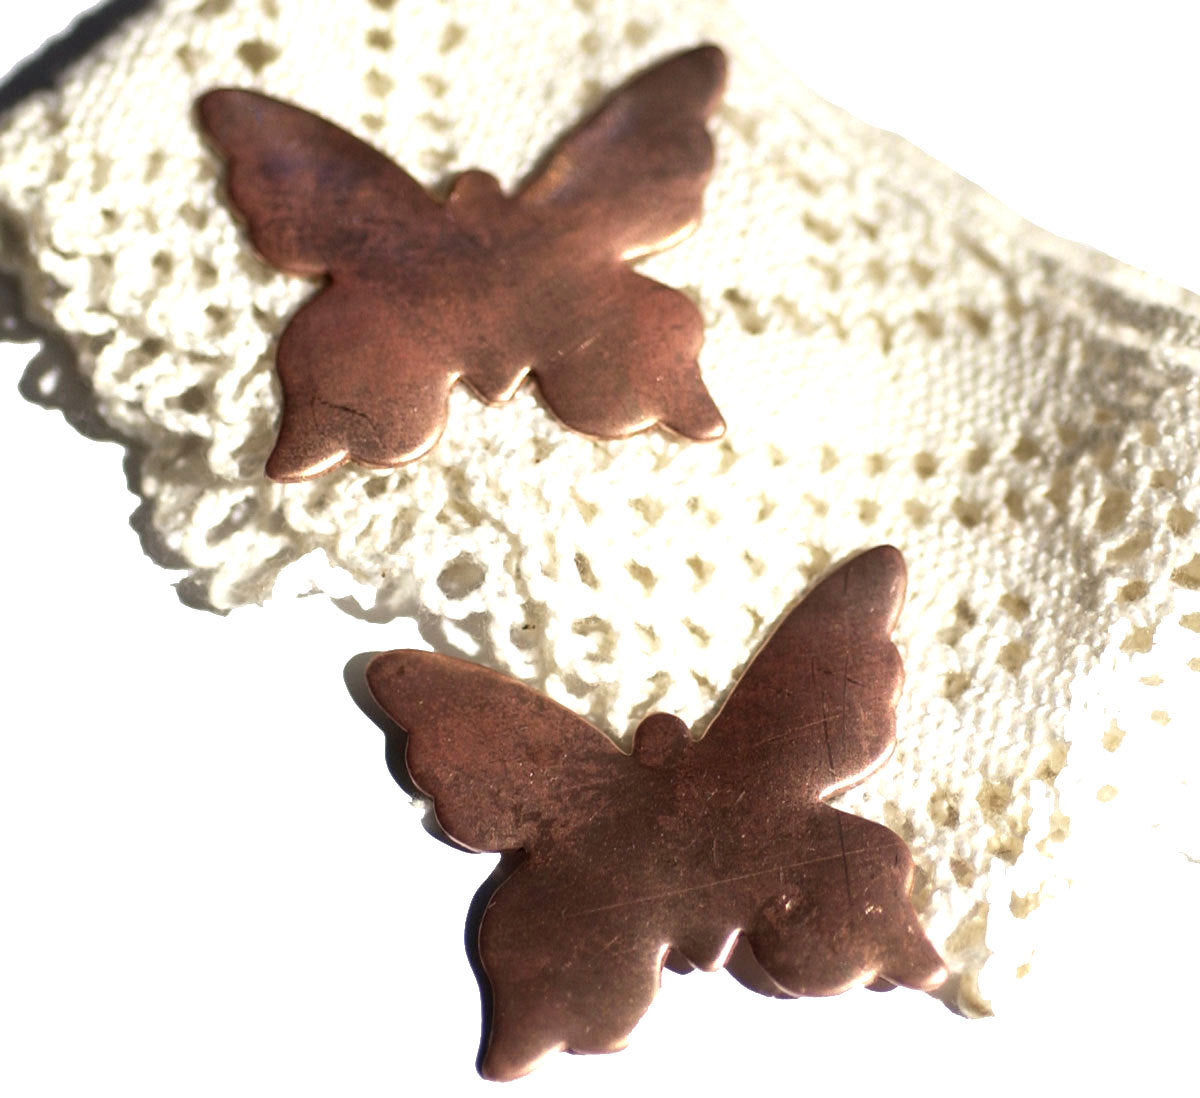 Butterfly shapes for pendants 40mm x 35mm for making jewelry, 24g, 22g, or 20g metal blanks